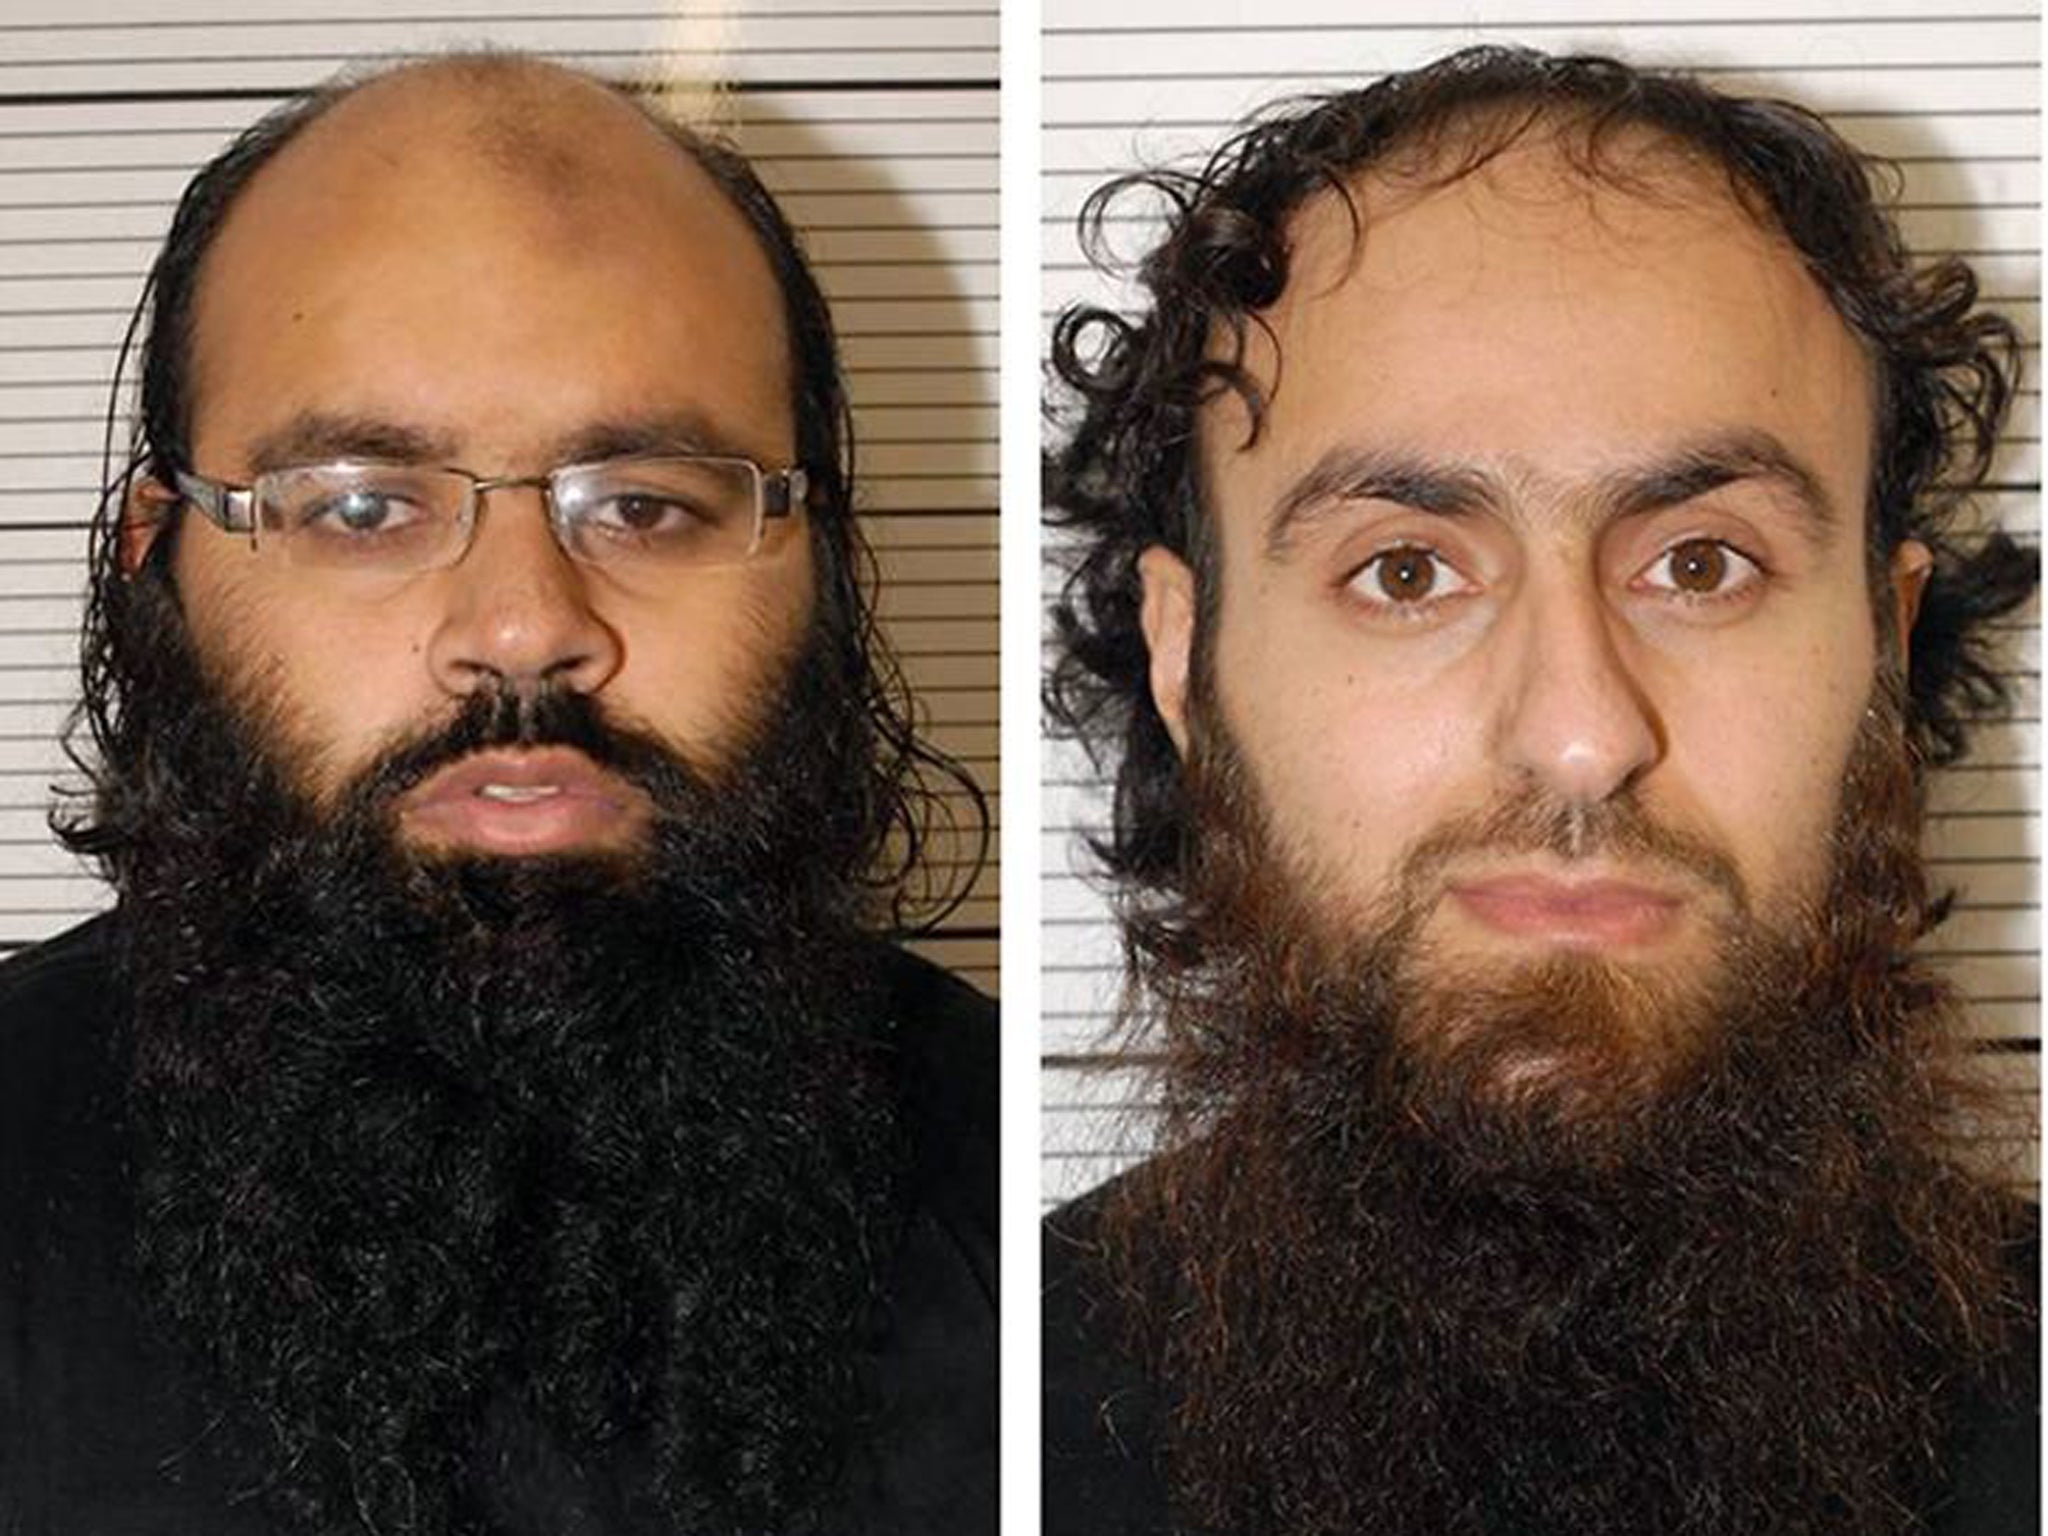 Police photos of terrorist plotters Irfan Naseer (left), 31, and Irfan Khalid, 27, who were described as ringleaders in the Birmingham extremist plot